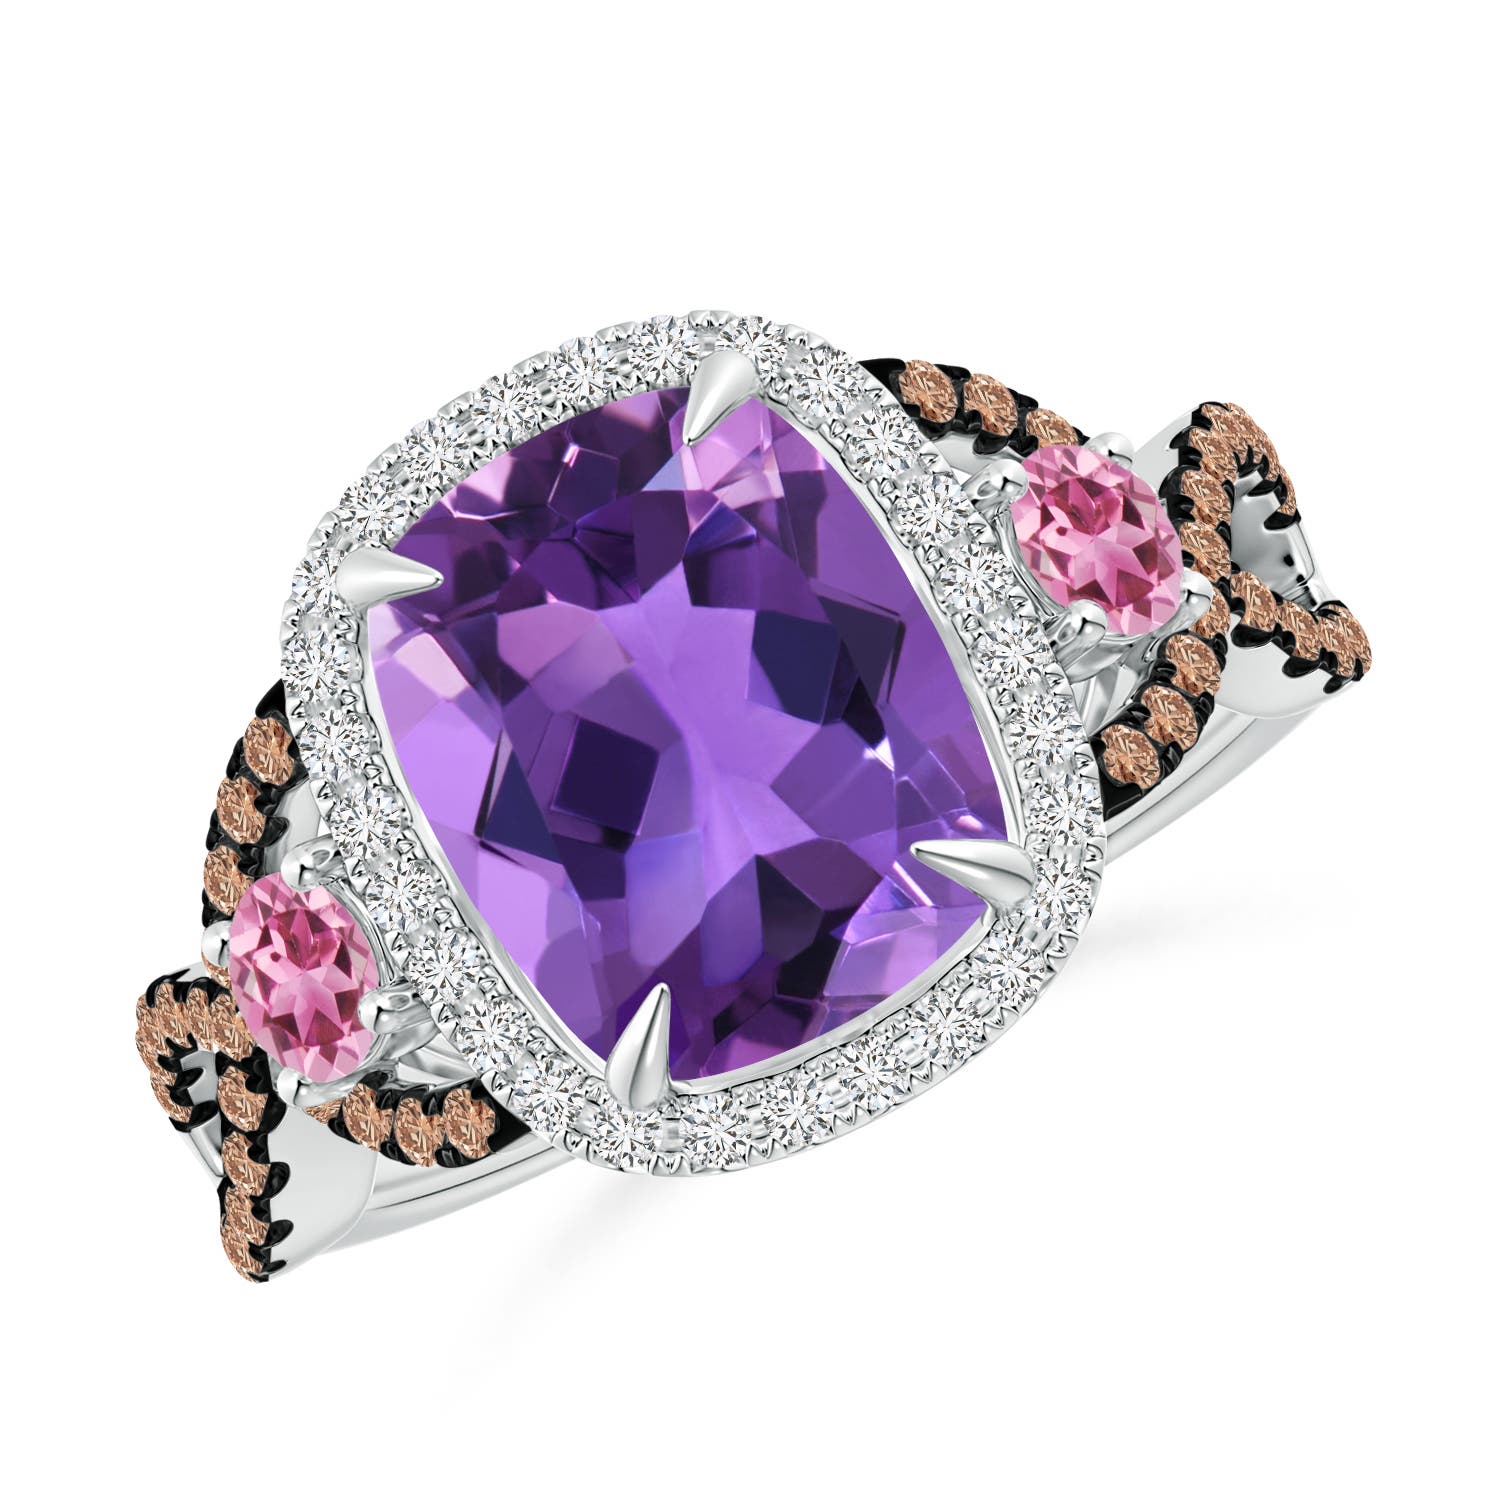 AAA - Amethyst / 3.39 CT / 14 KT White Gold